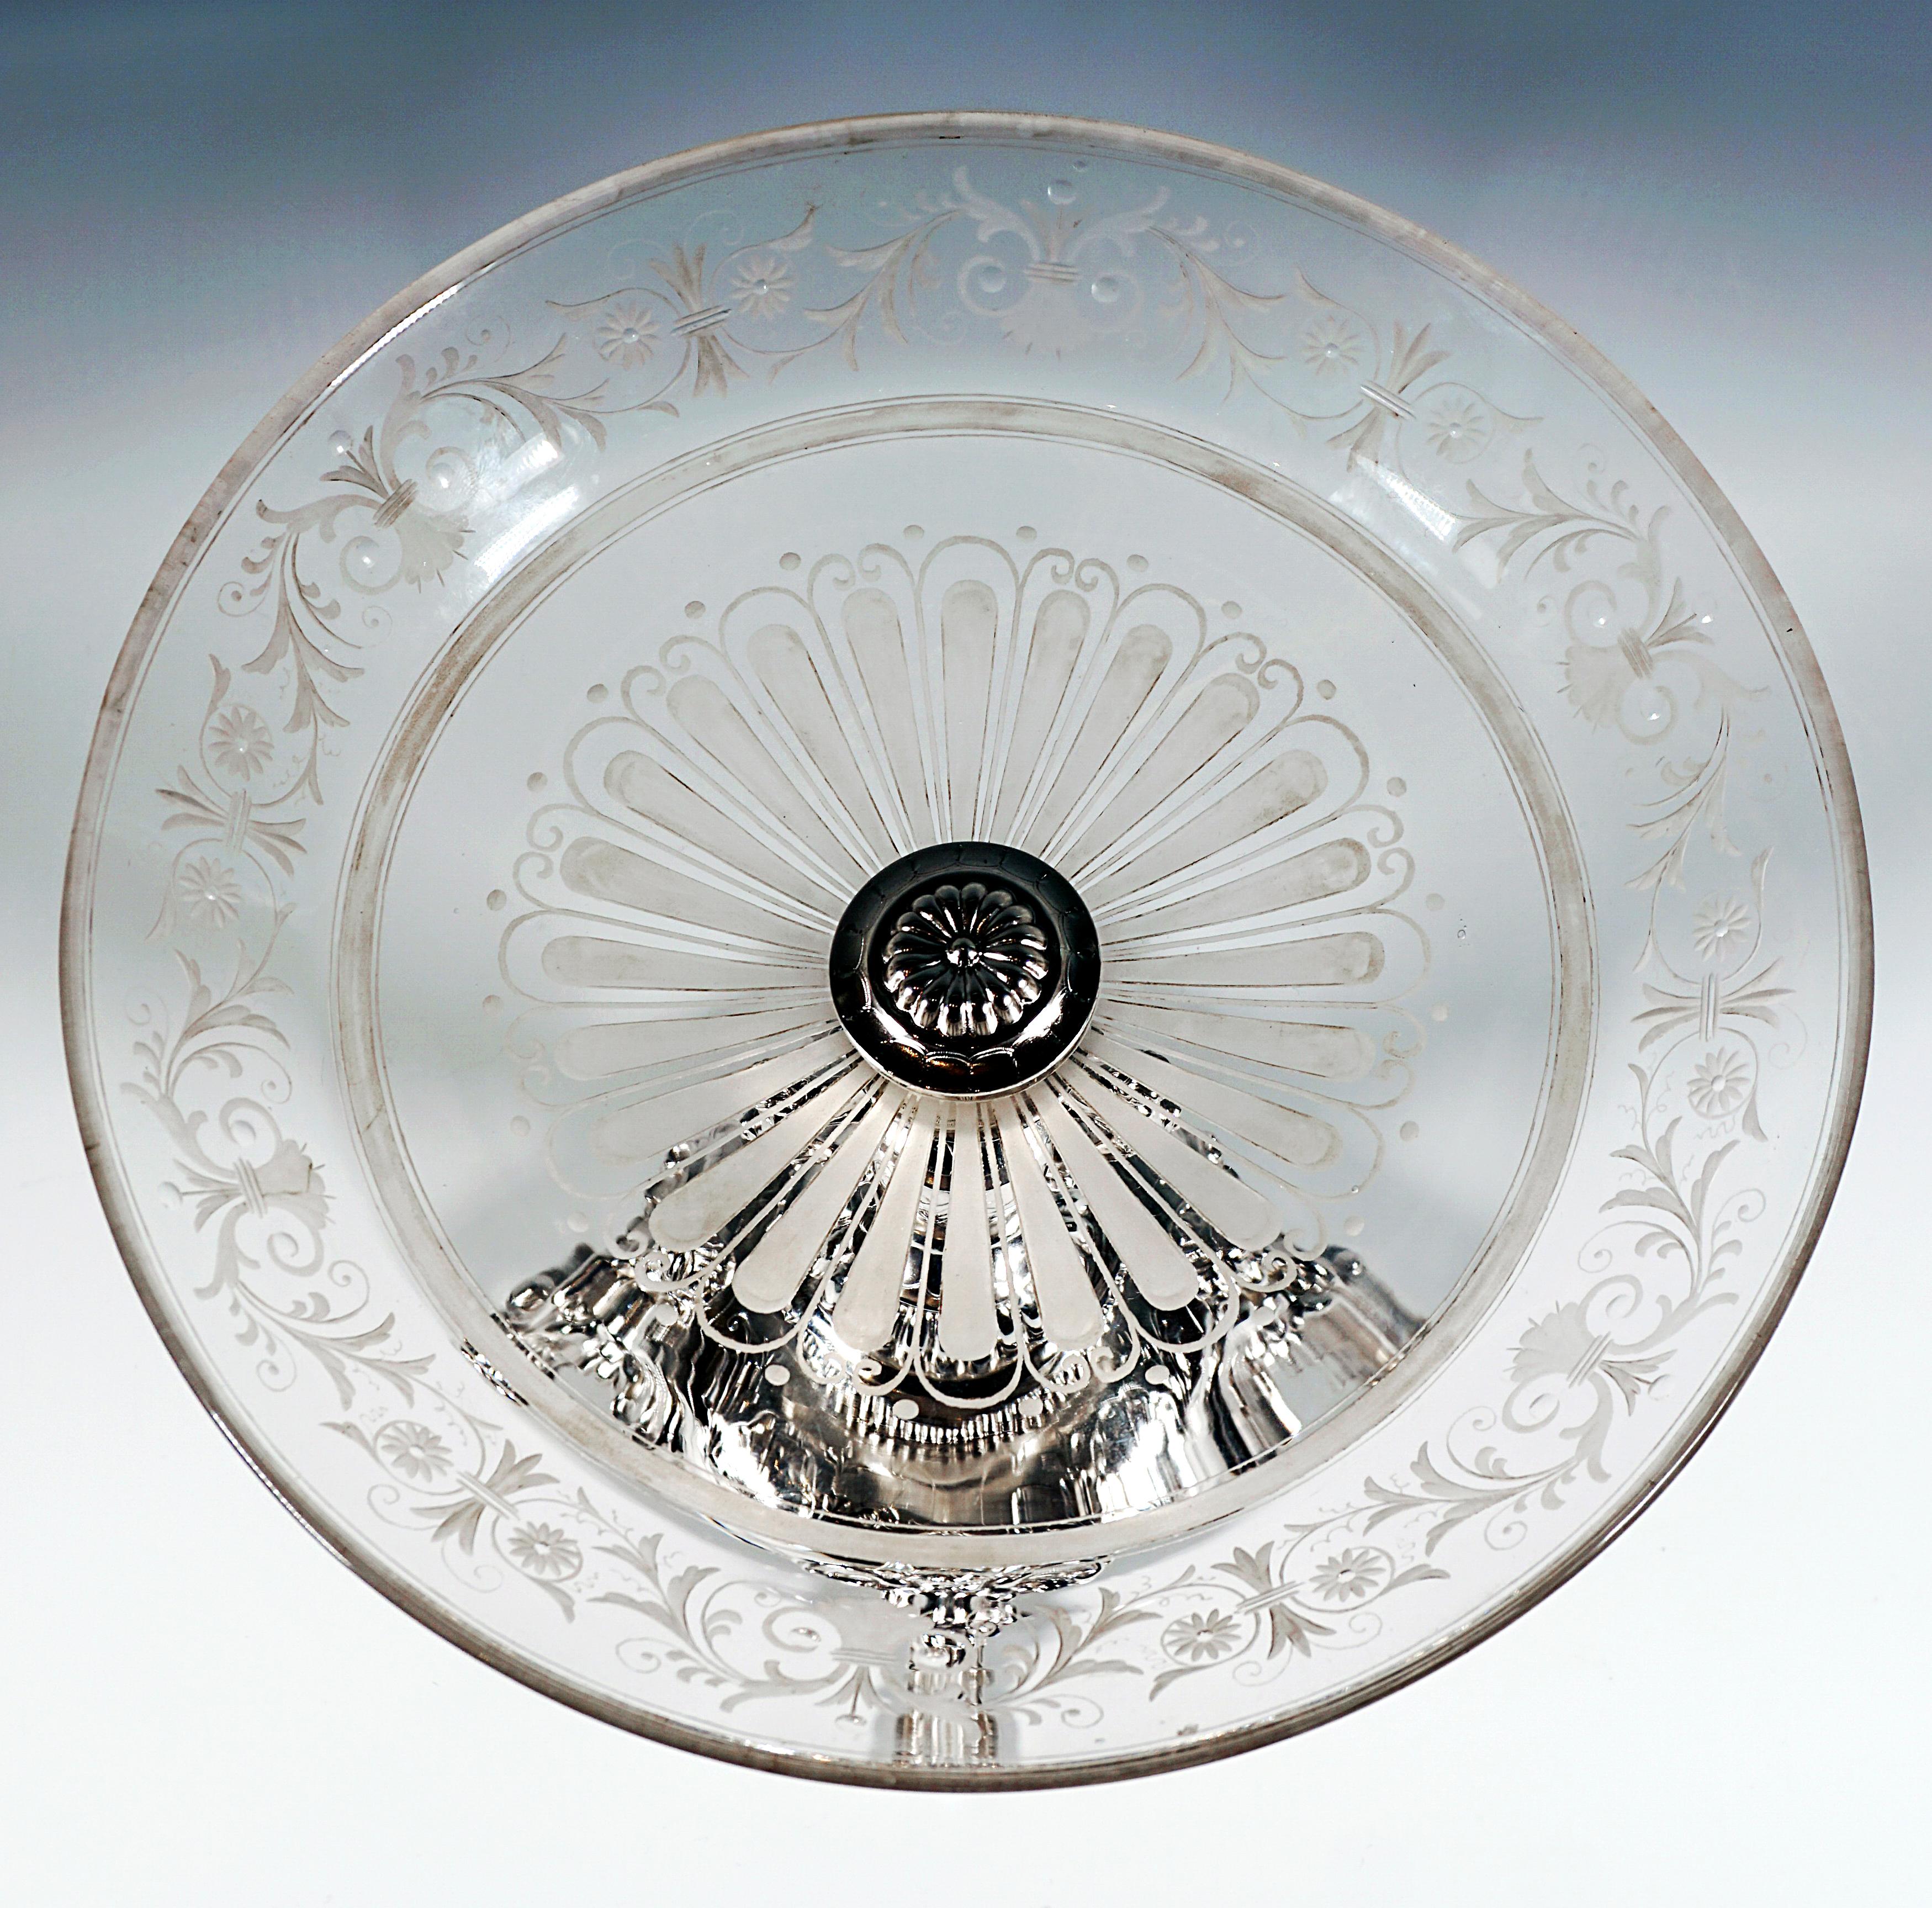 Hand-Crafted Viennese Art Nouveau Silver Centerpiece With Original Glass Bowl, Around 1900 For Sale